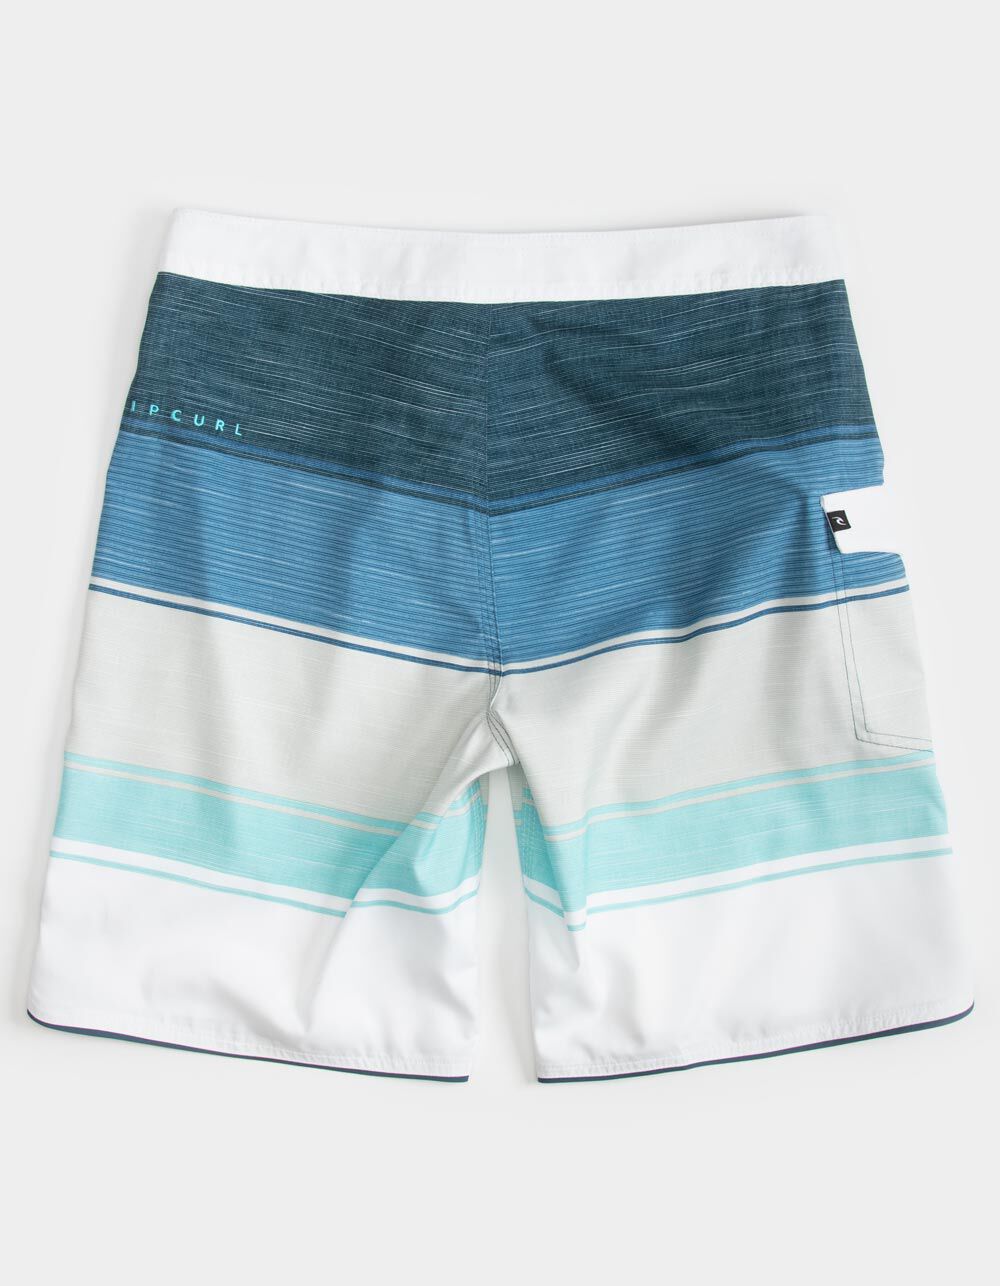 RIP CURL State Park 4.0 Mens Blue Combo Boardshorts - BLUE COMBO | Tillys